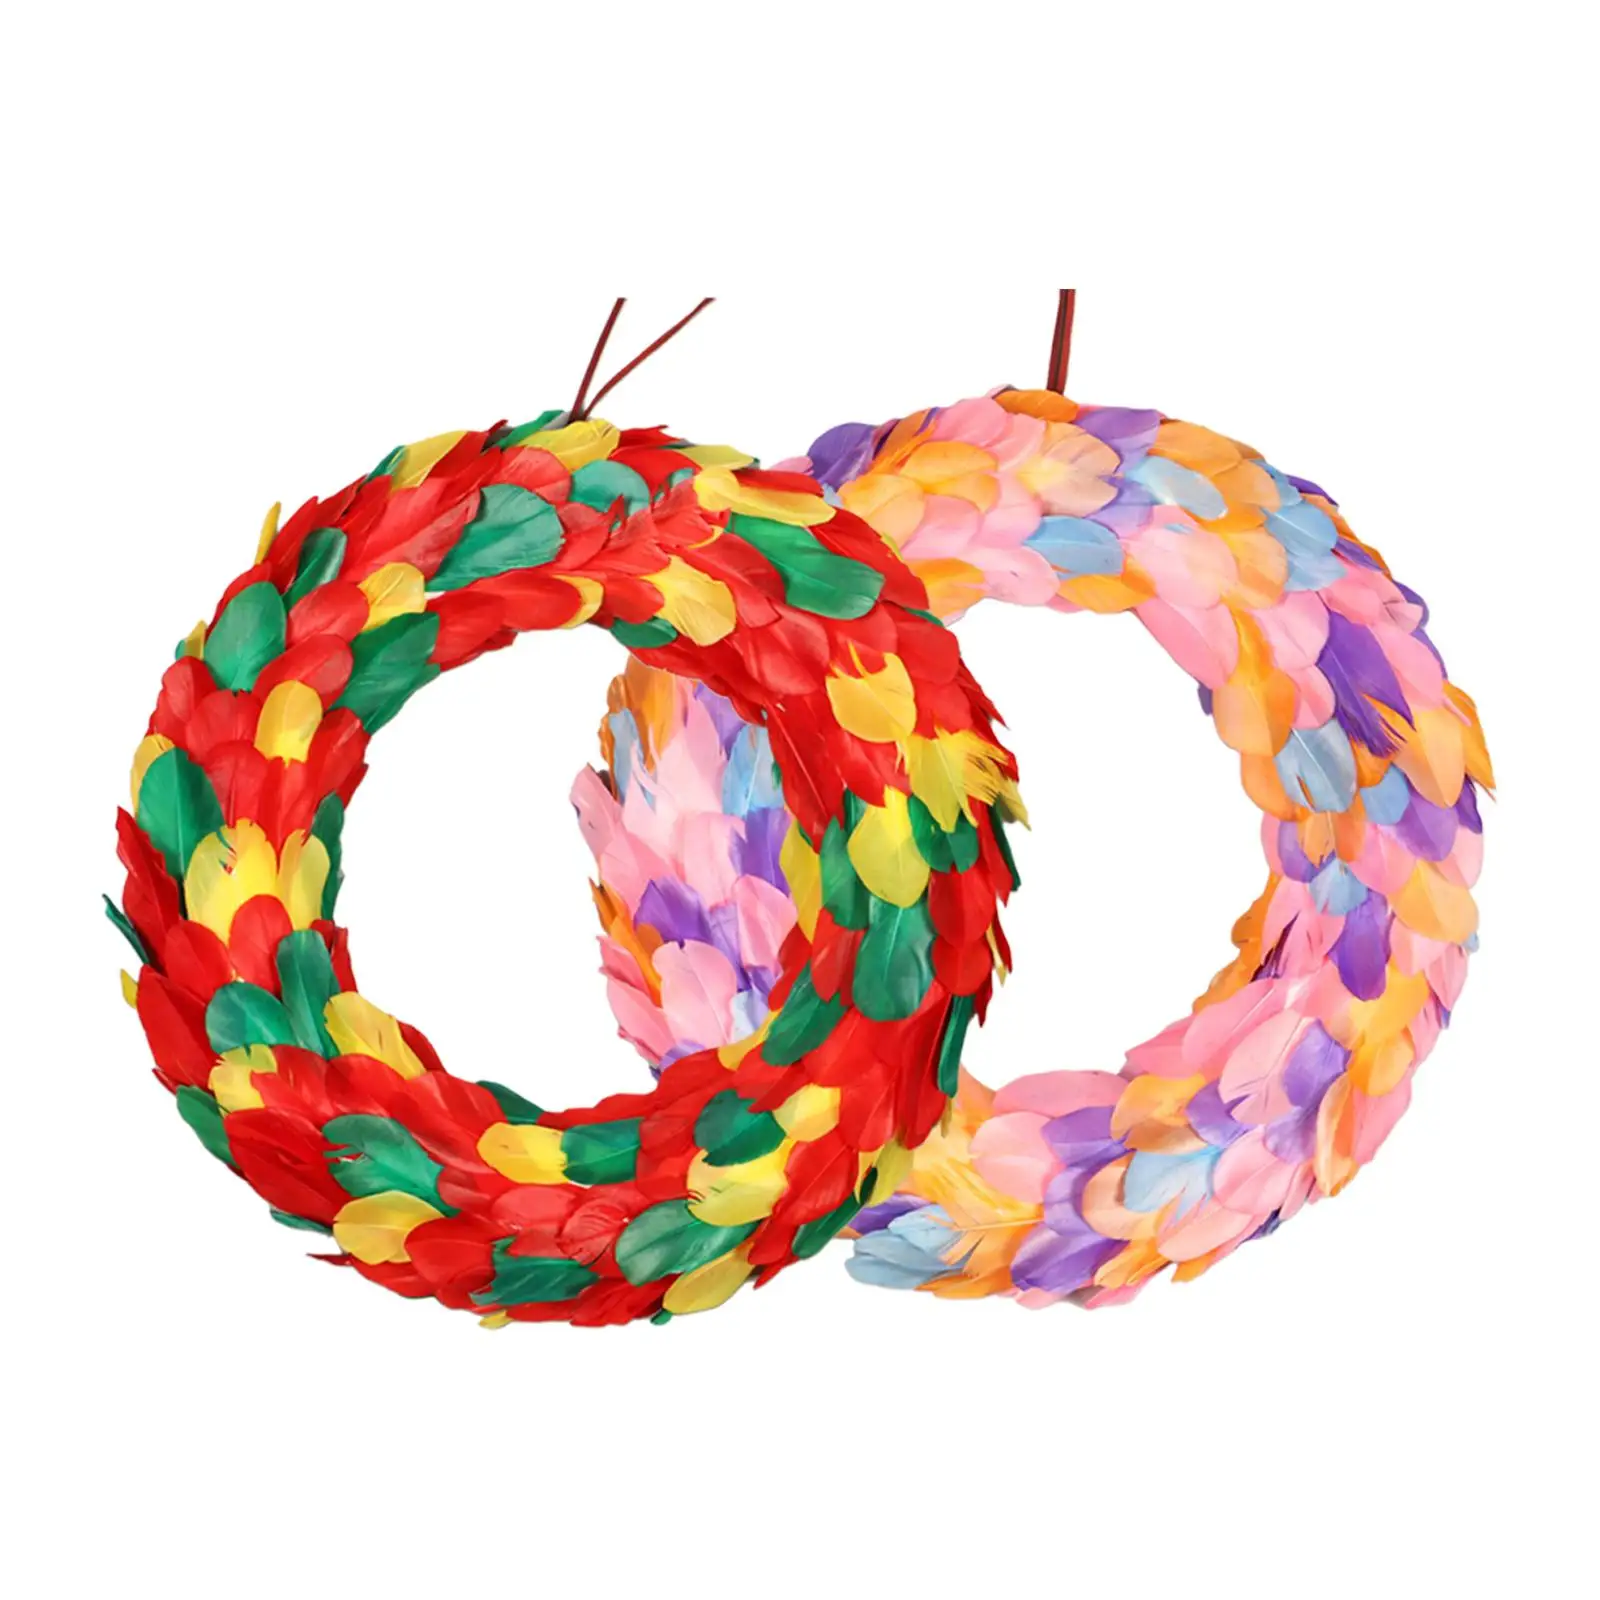 33cm Easter Feather Wreath  Hanging Christmas Colorful Novelty Single-Sided Garland for Front Door Wedding Home Party New Year